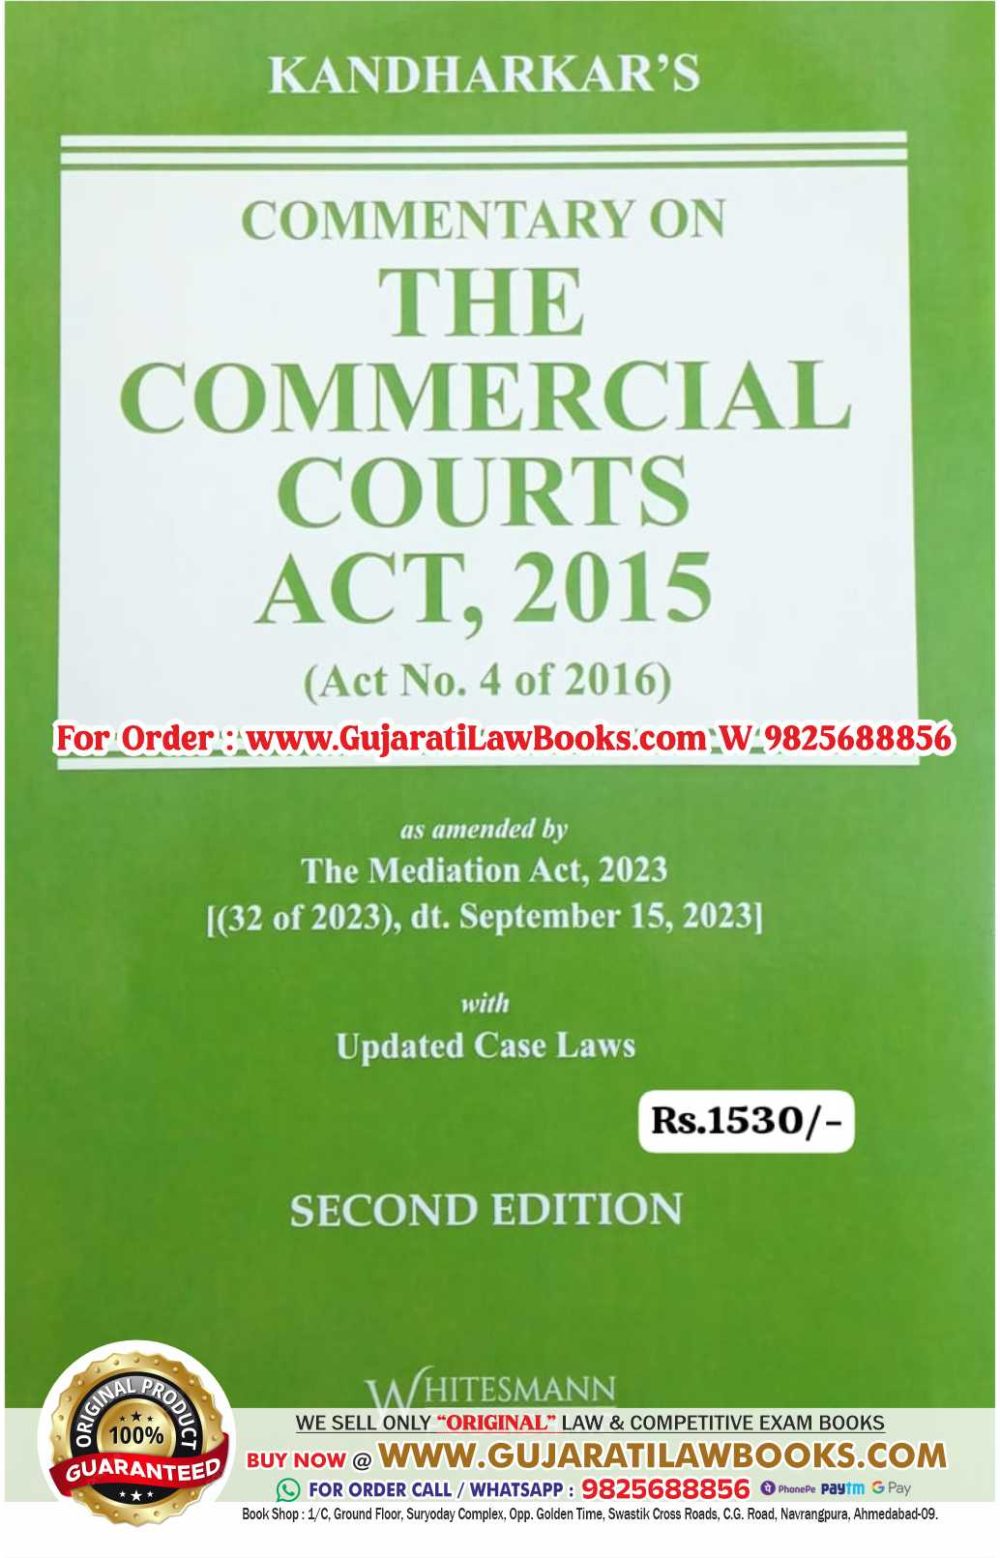 Kandharkar's COMMENTARY ON THE COMMERCIAL COURTS ACT, 2015 - Latest 2nd Edition 2024 Whitesmann